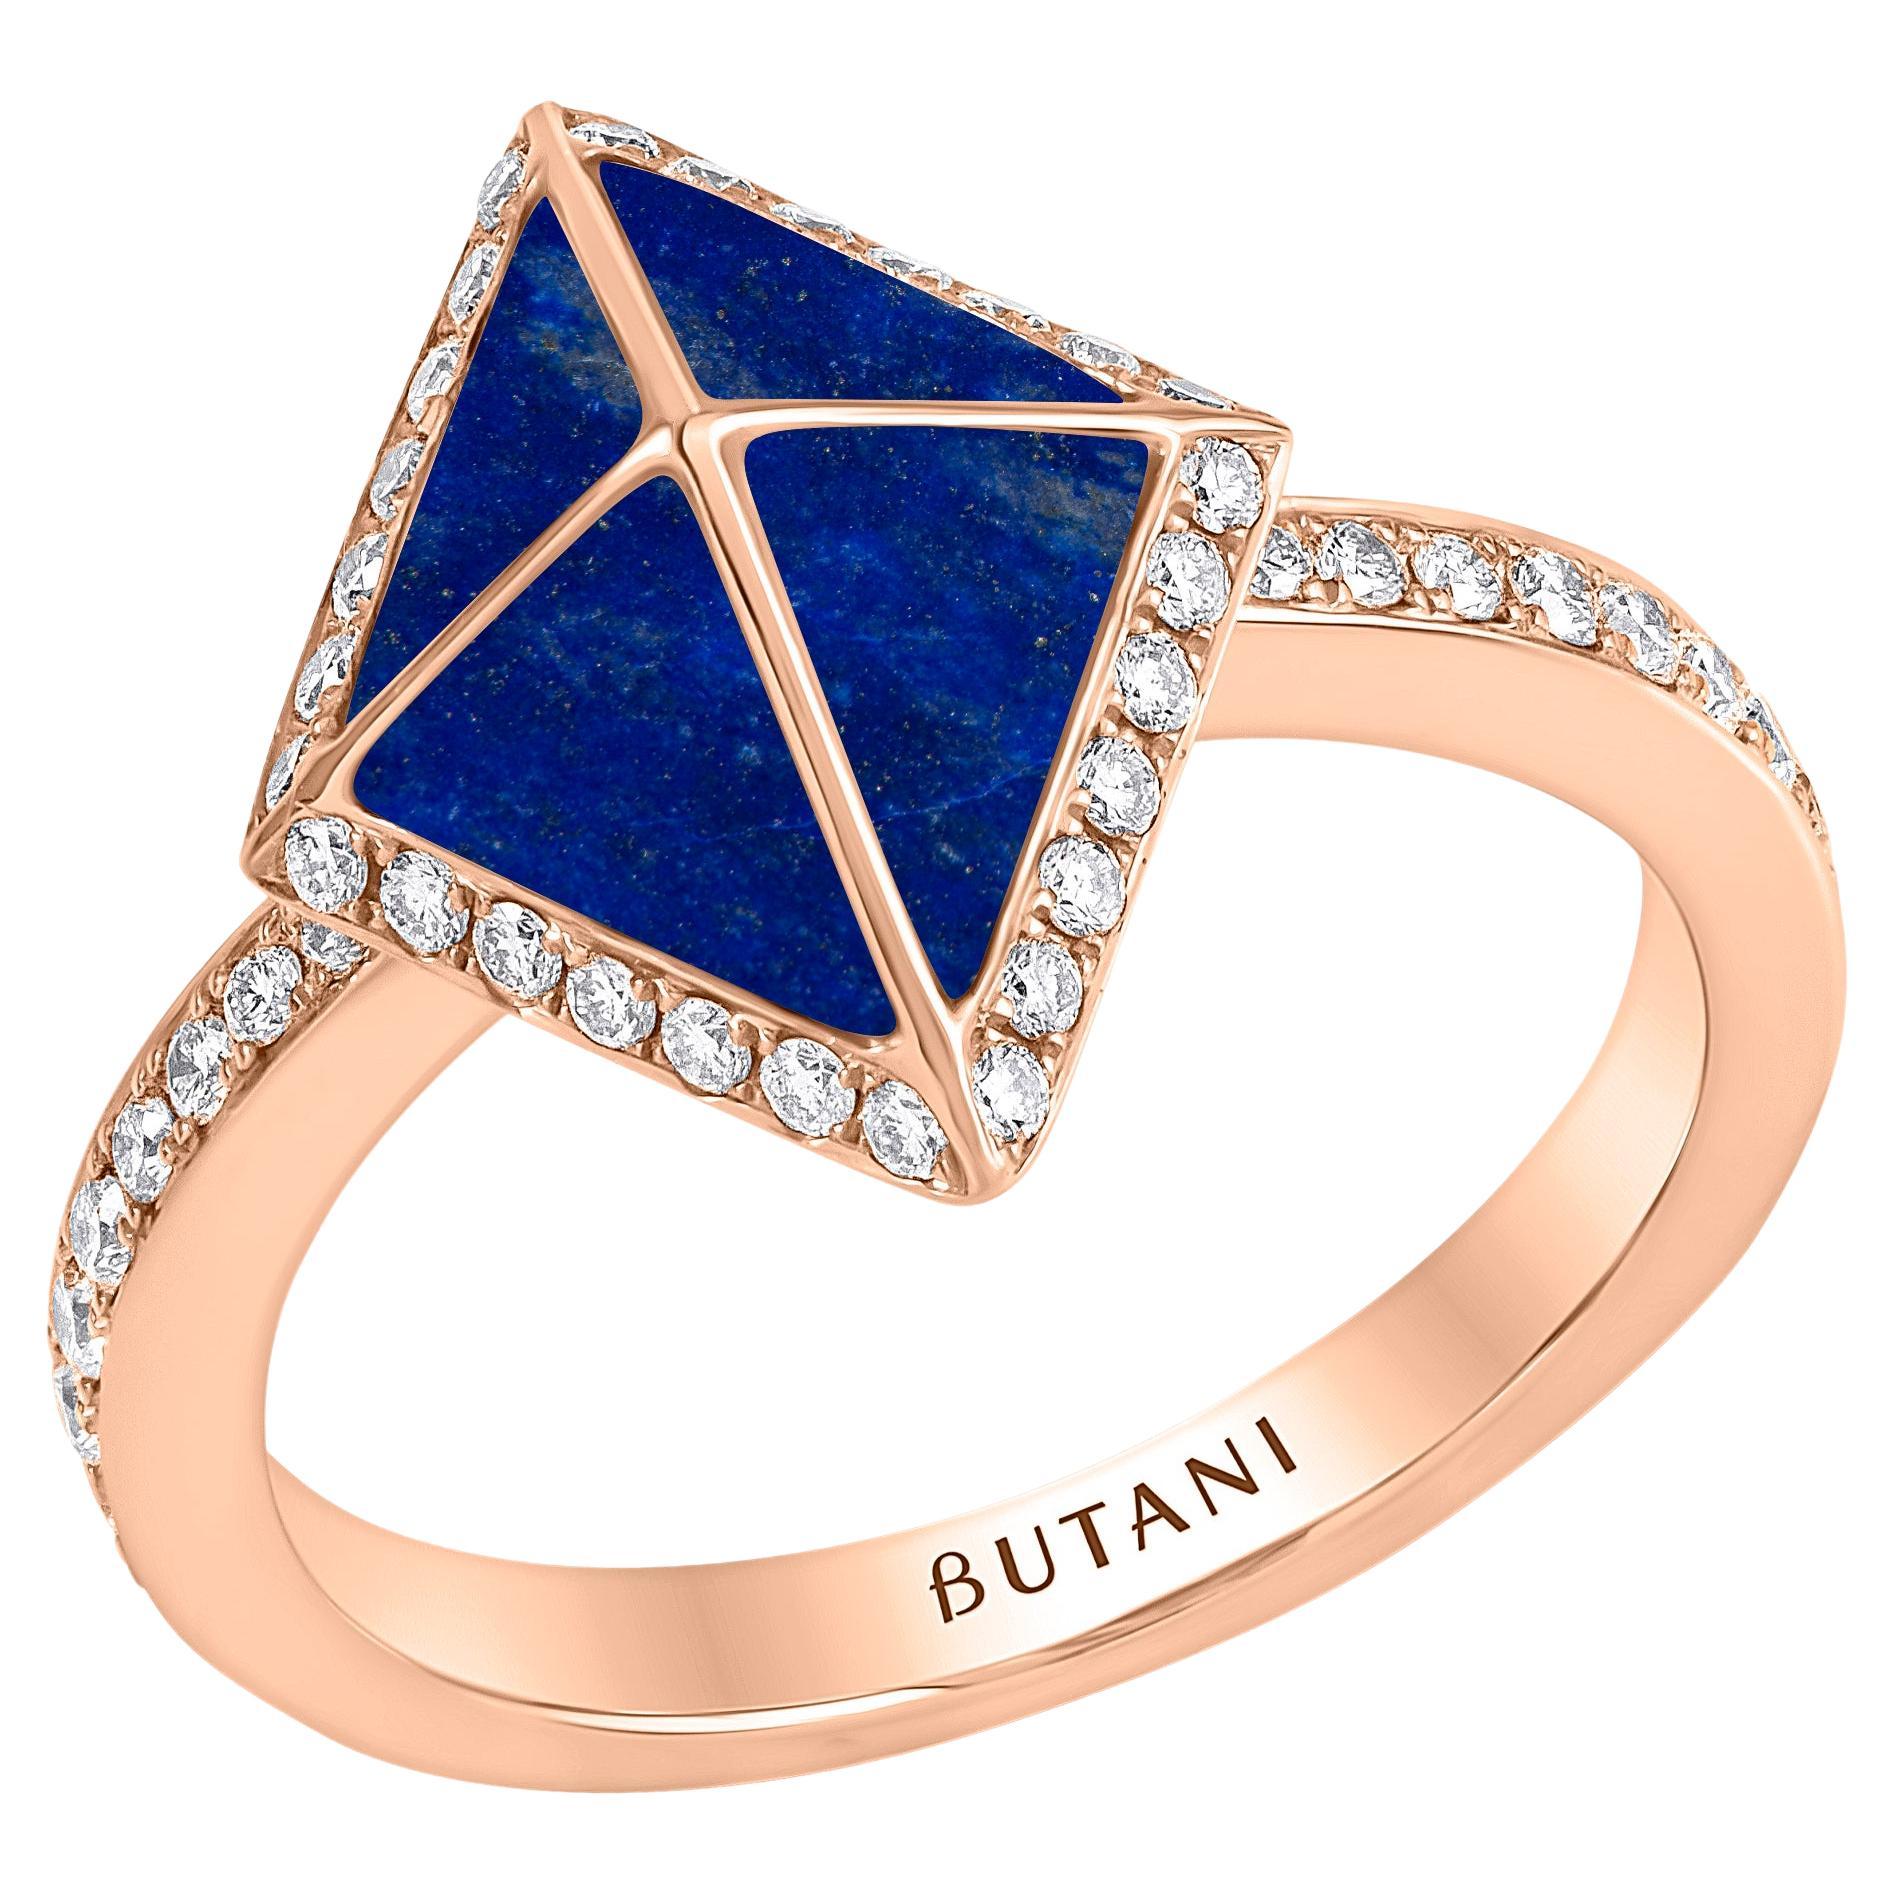 Tetra Zenith Ring with Lapis Lazuli and Diamonds in 18k Rose Gold For Sale